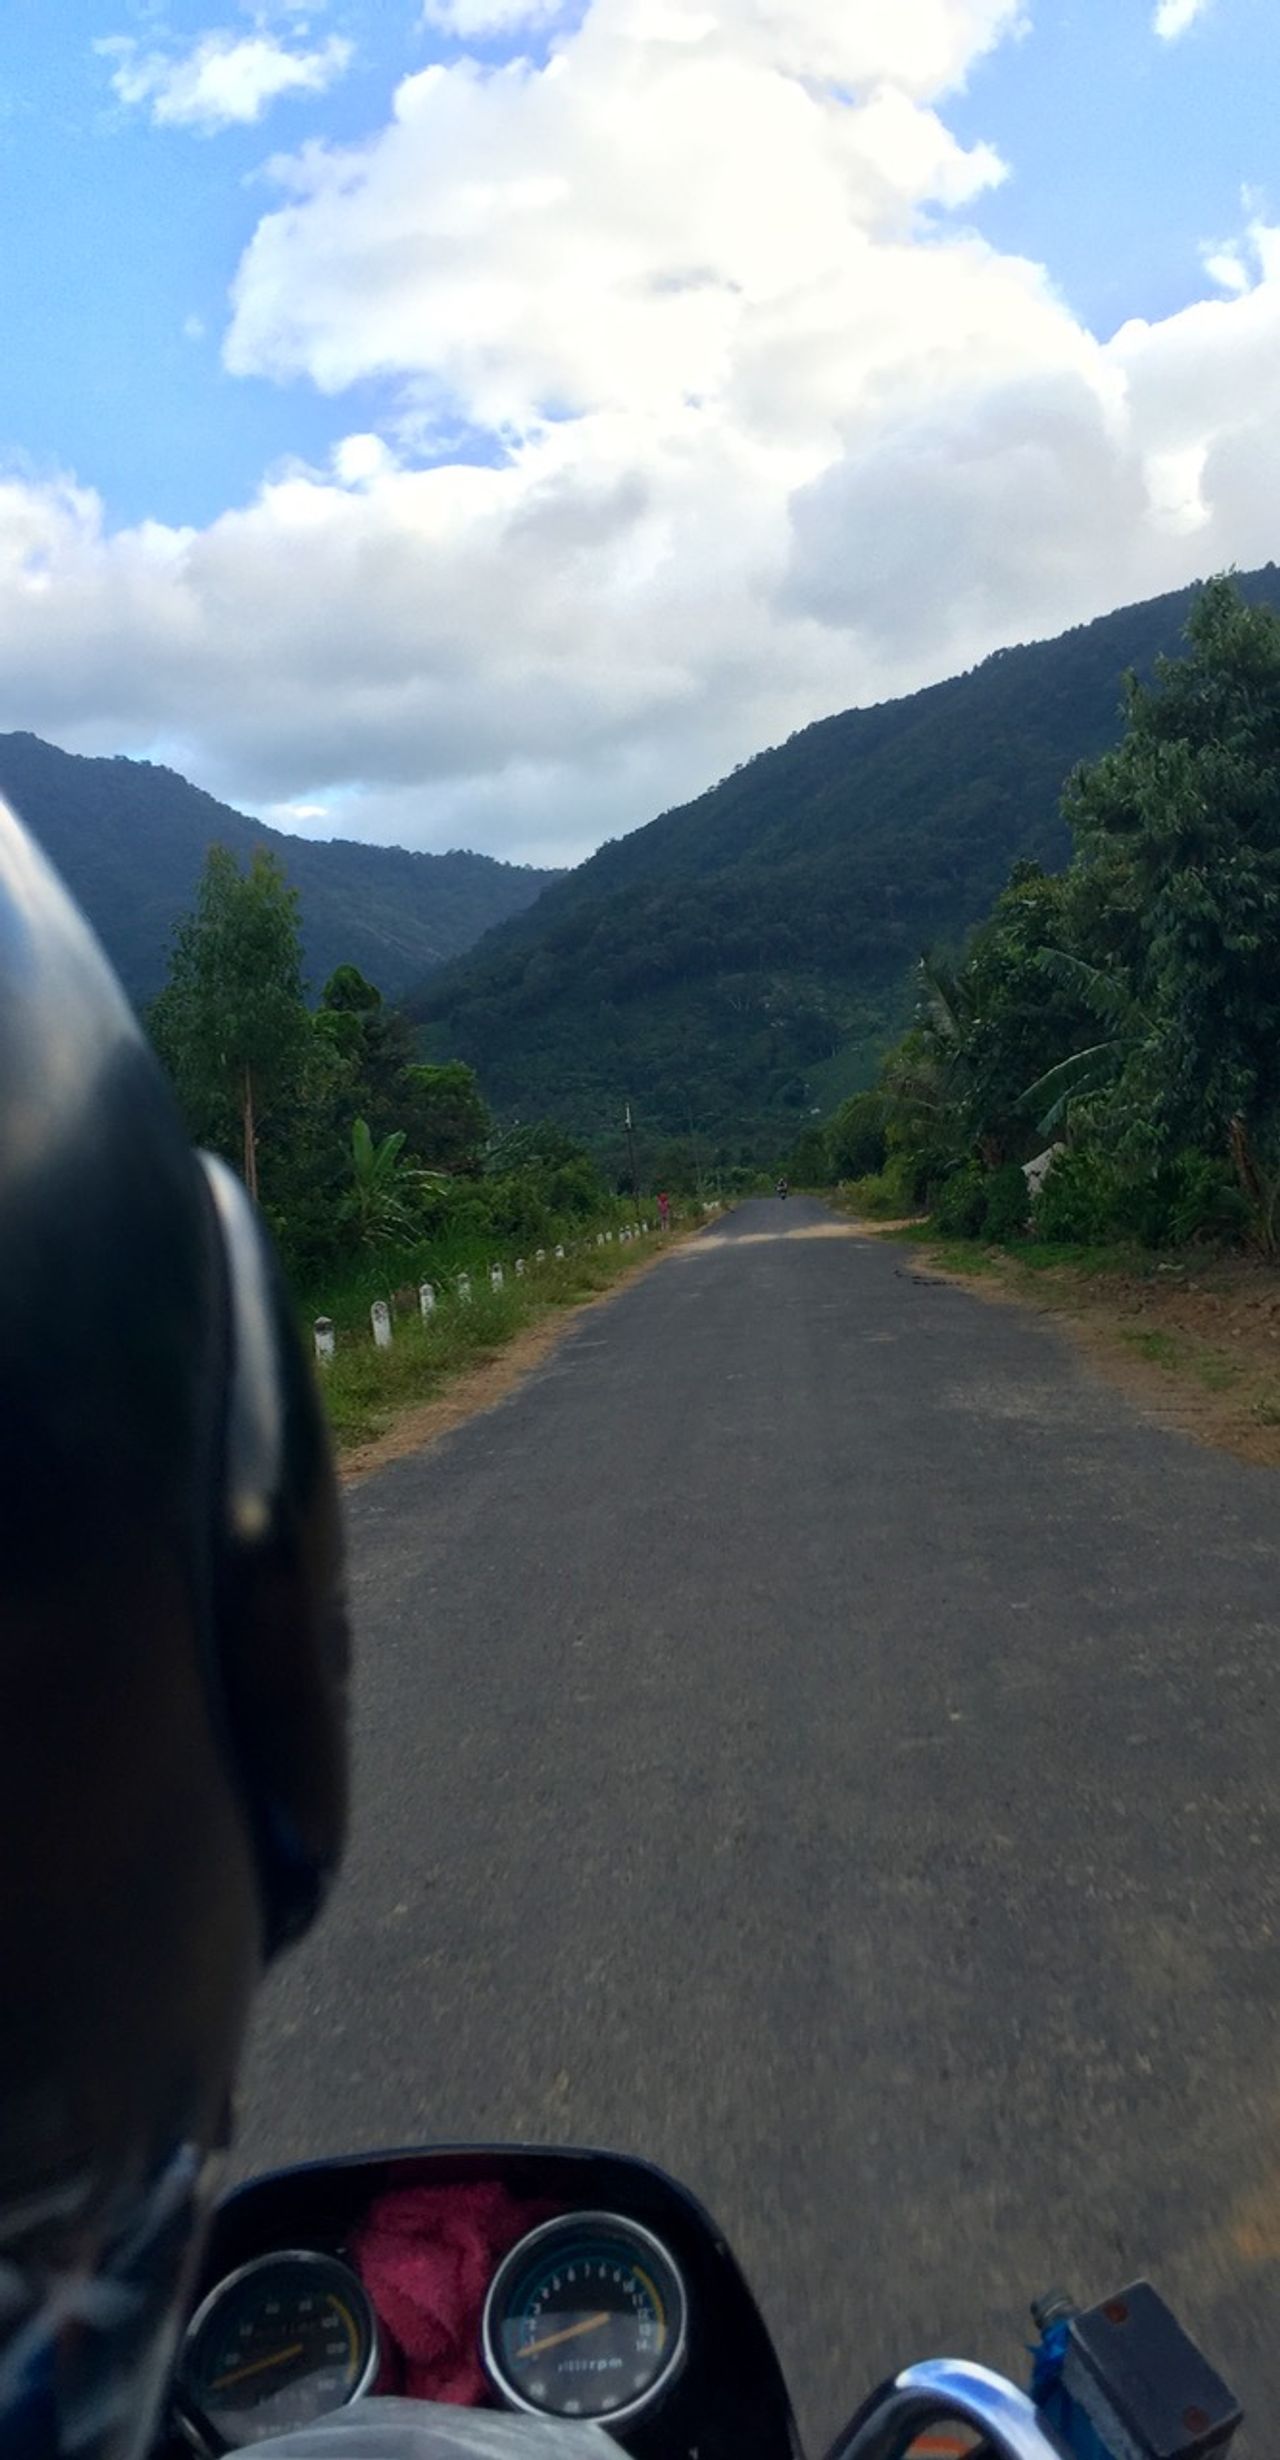 The view from the back of the motorbike as it heads toward mountains.